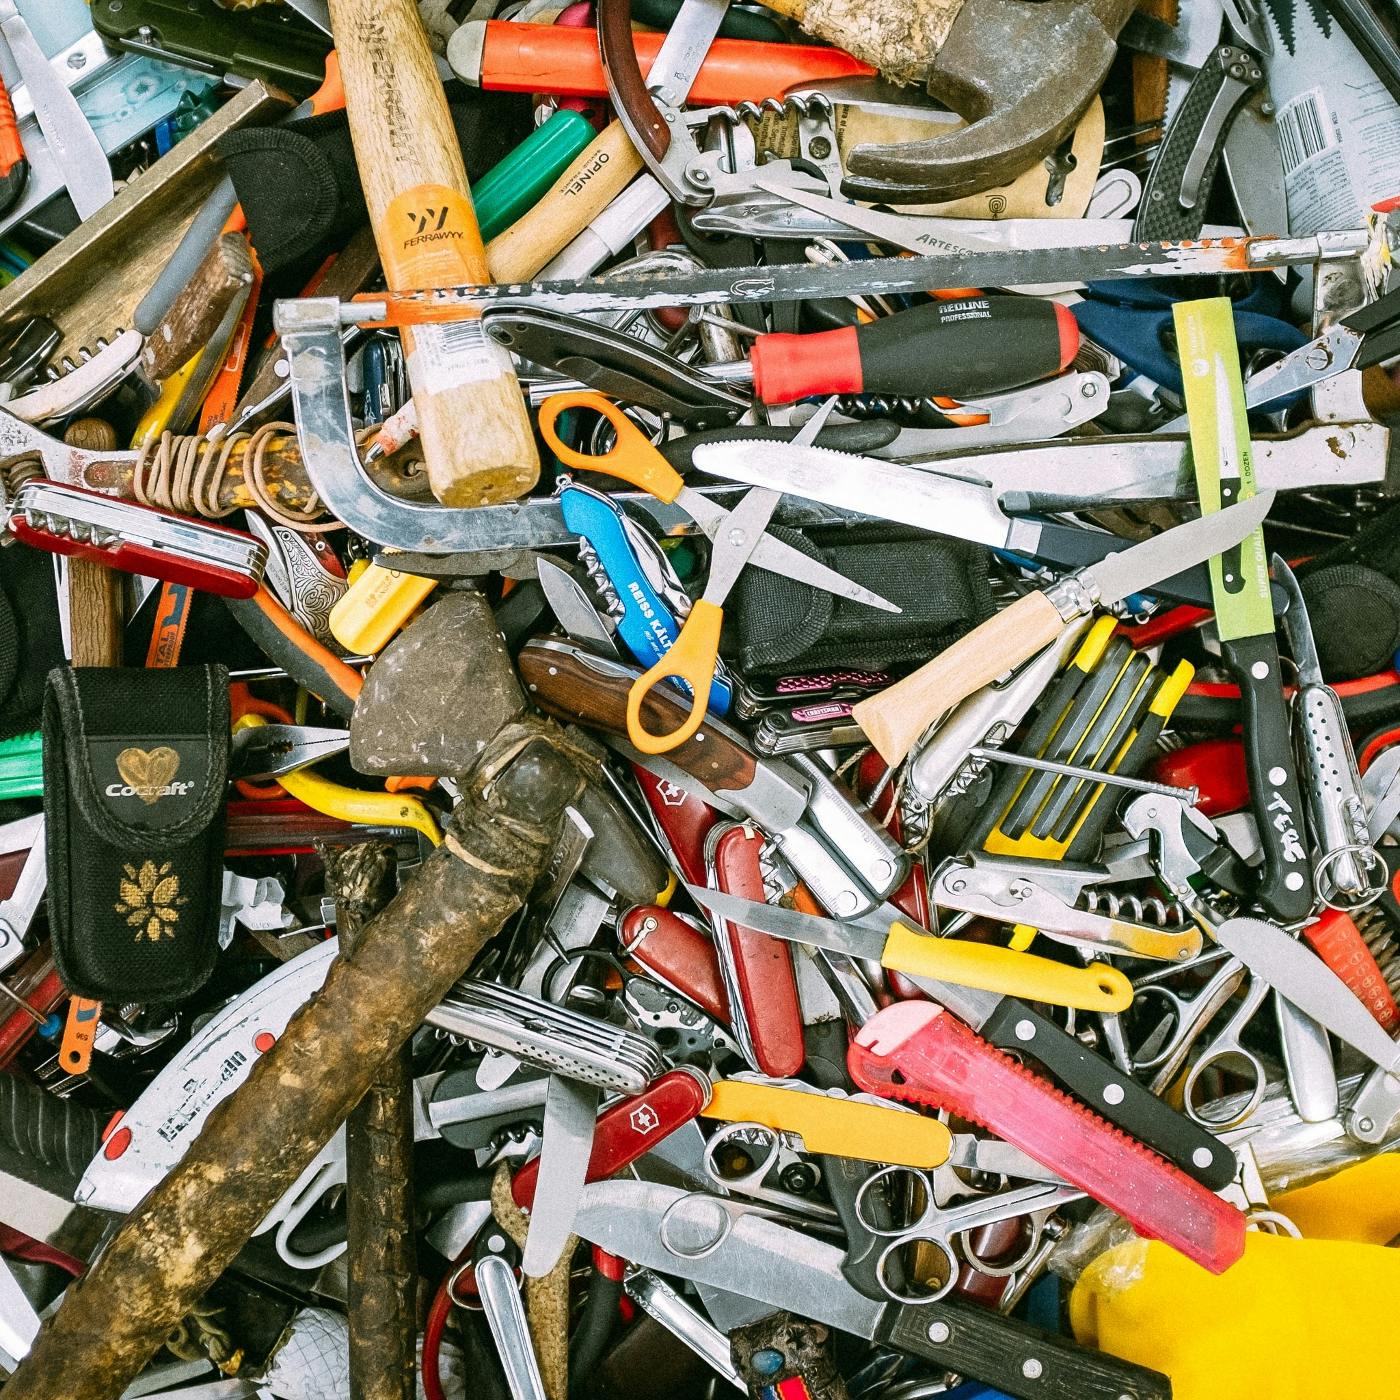 A pile of various, well-used tools